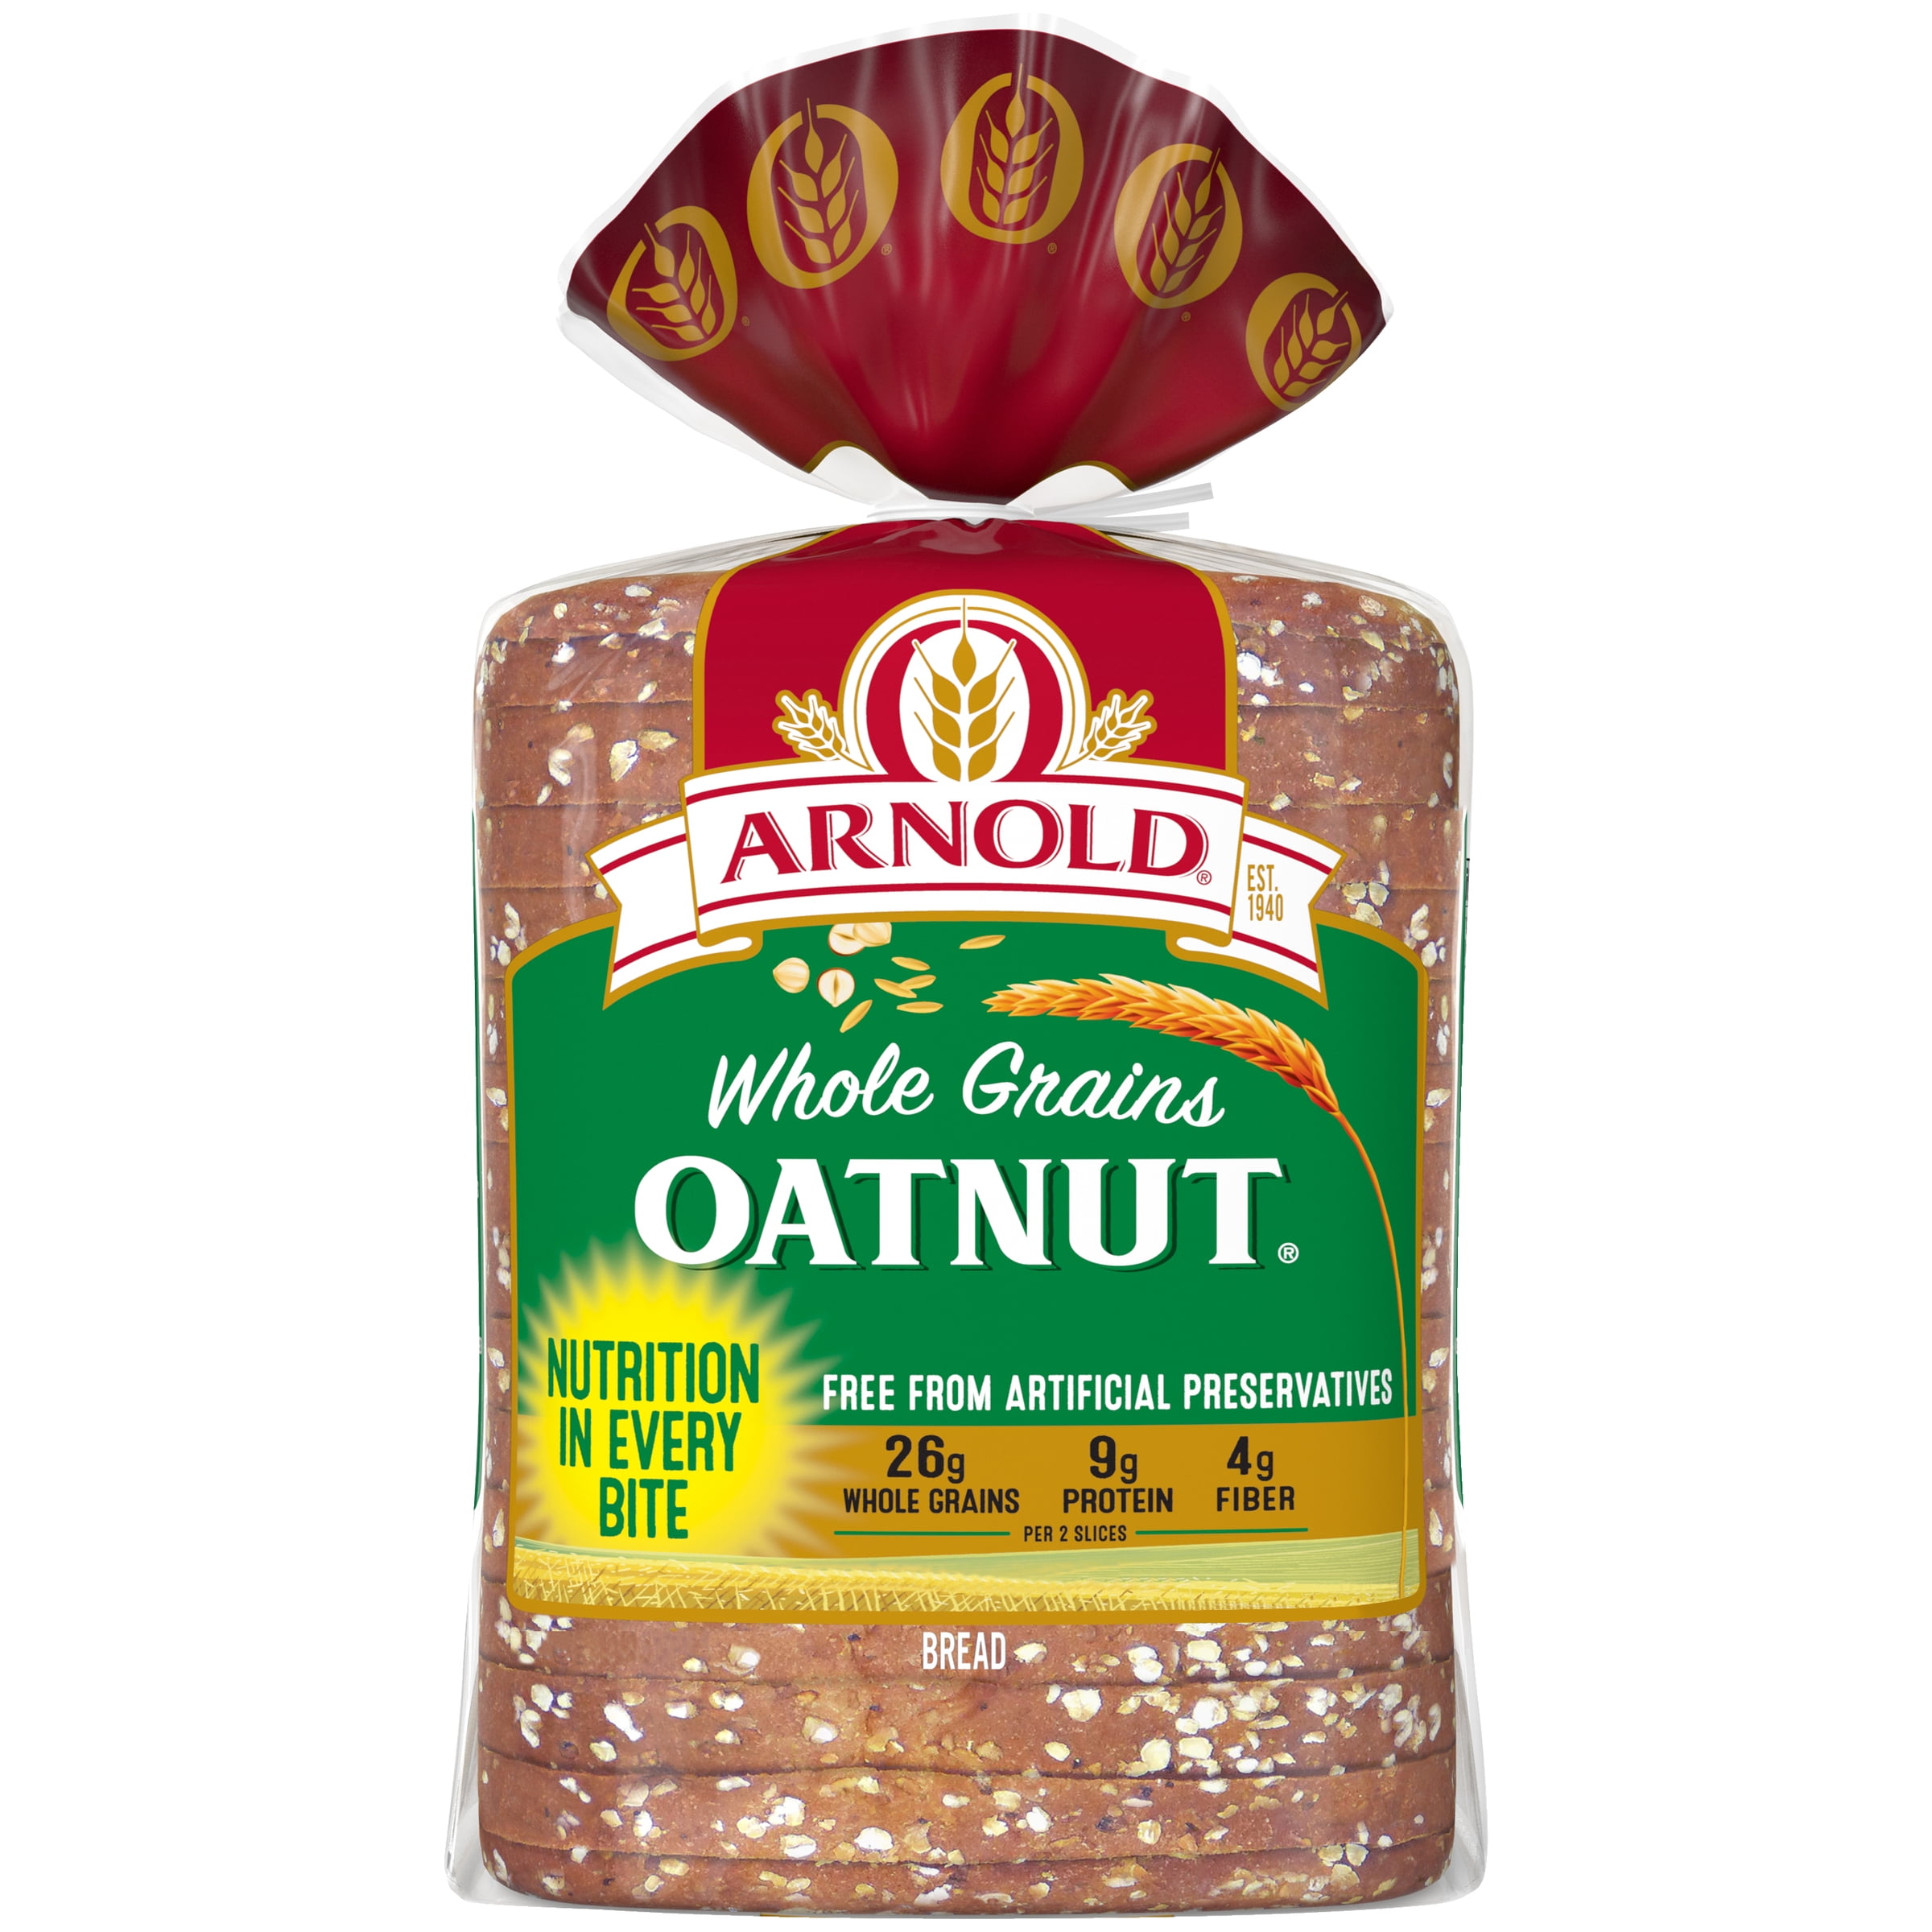 Arnold Whole Grains Oatnut Bread, Free from Artificial Preservatives, 24 oz